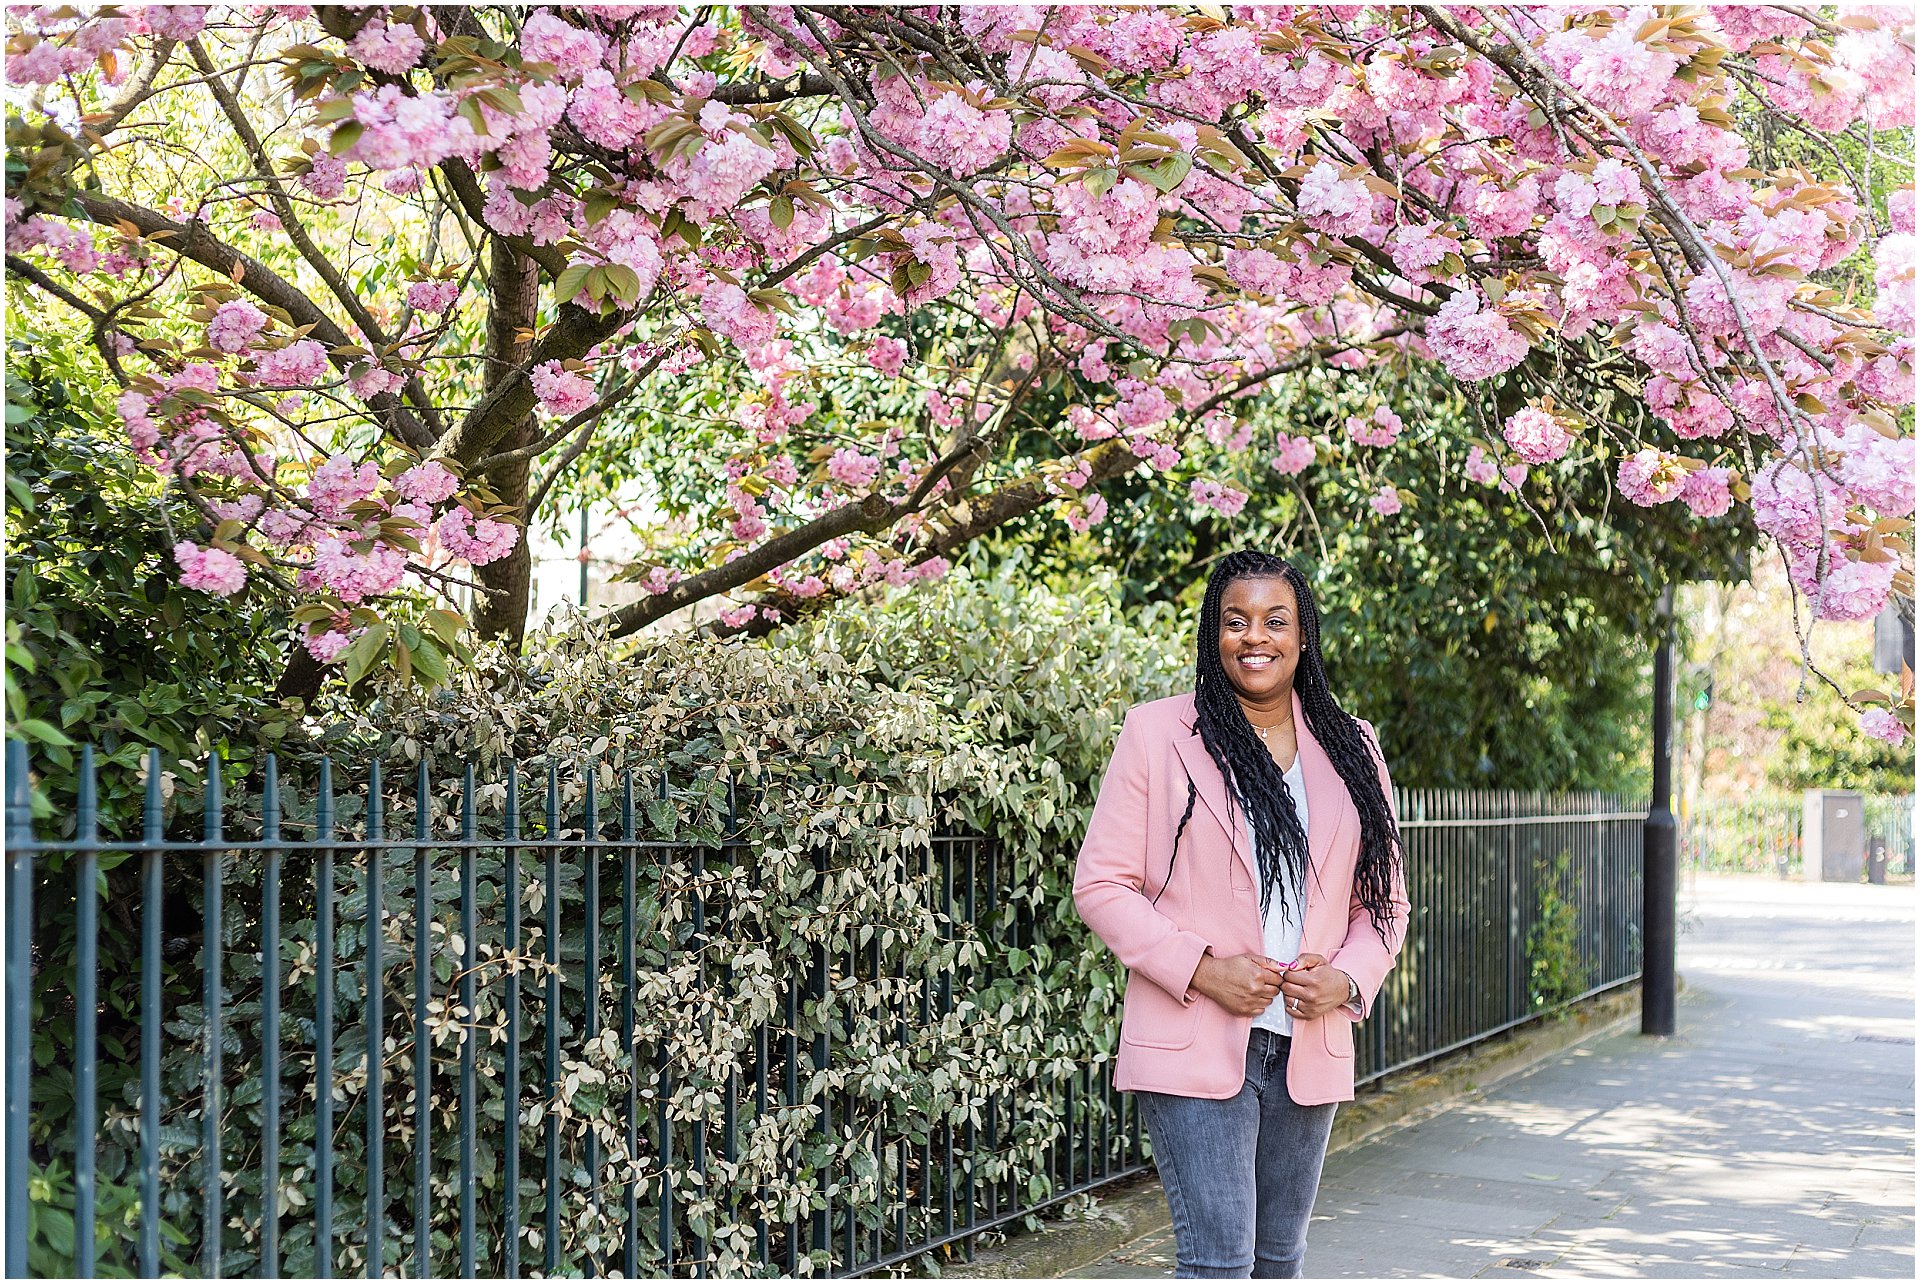 Wedding planner Natasha is stood underneath a blossom tree in London.  She is a black lady wearing jeans and a pink blazer. Image by London brand photographer AKP Branding Stories